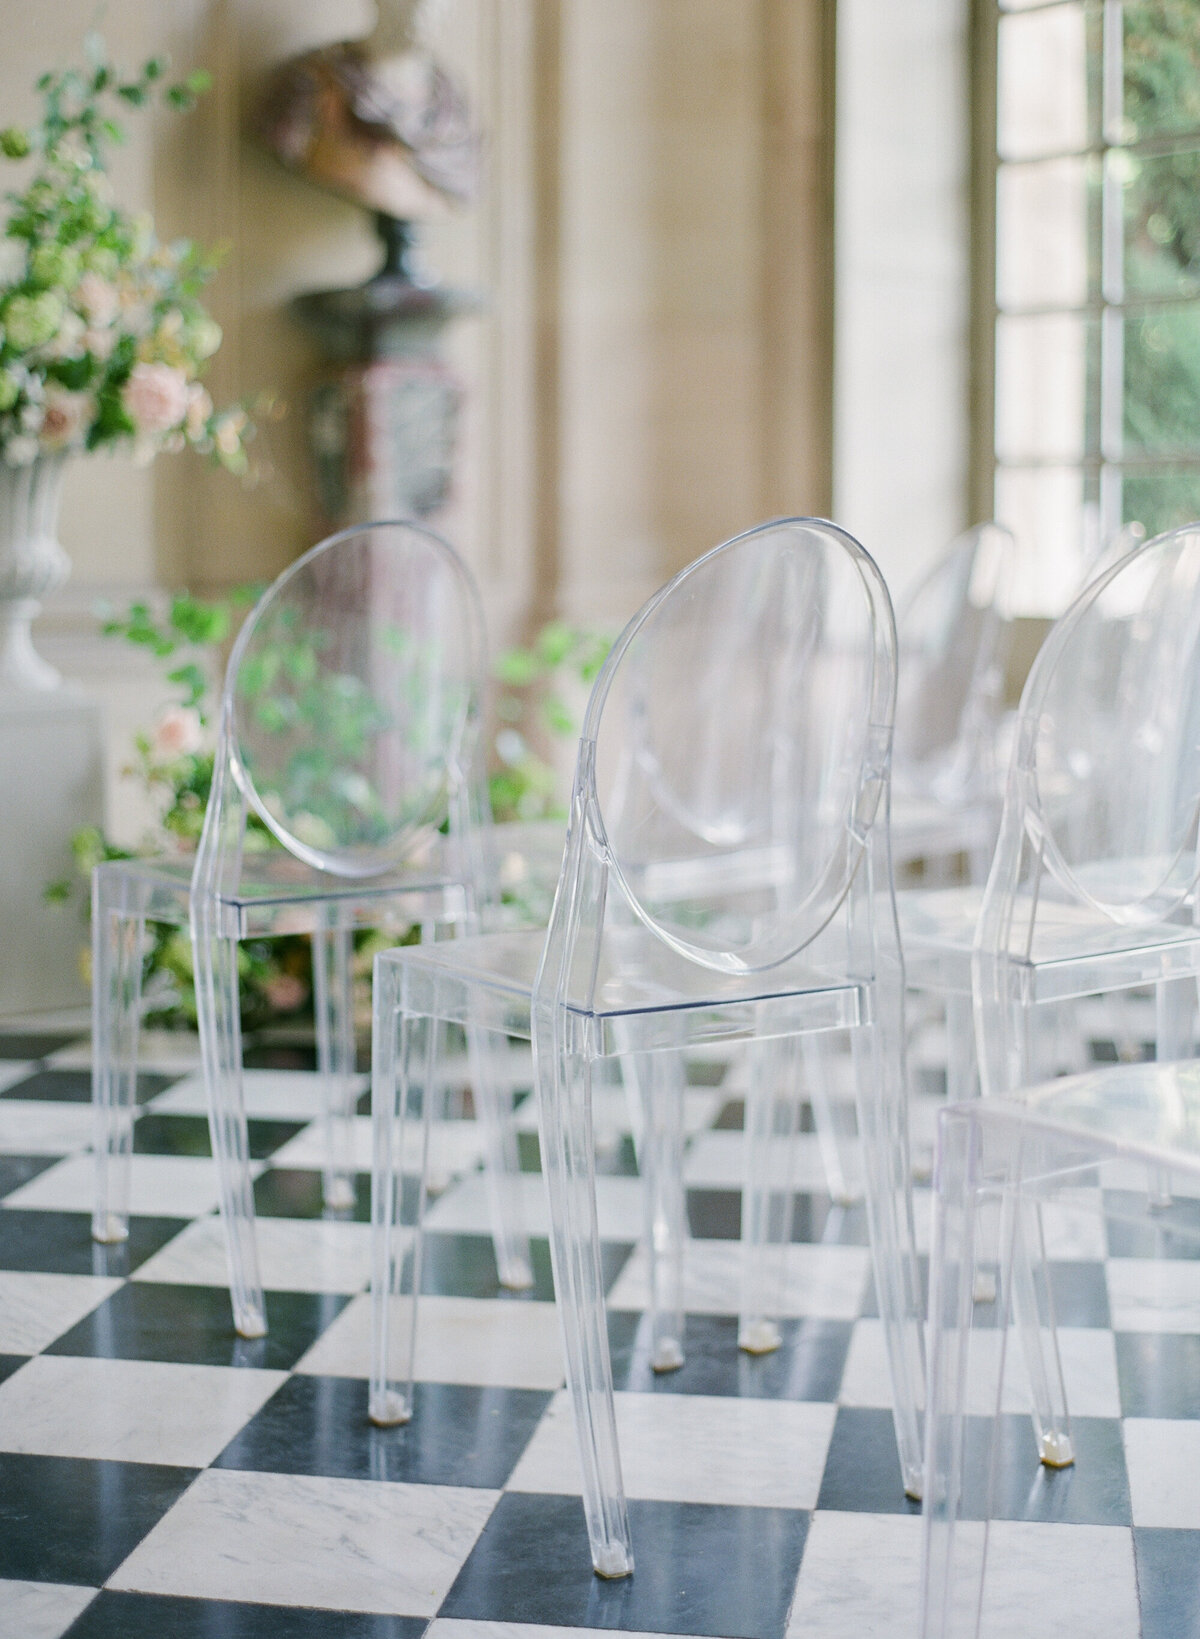 Jennifer Fox Weddings English speaking wedding planning & design agency in France crafting refined and bespoke weddings and celebrations Provence, Paris and destination Laurel-Chris-Chateau-de-Champlatreaux-Molly-Carr-Photography-62